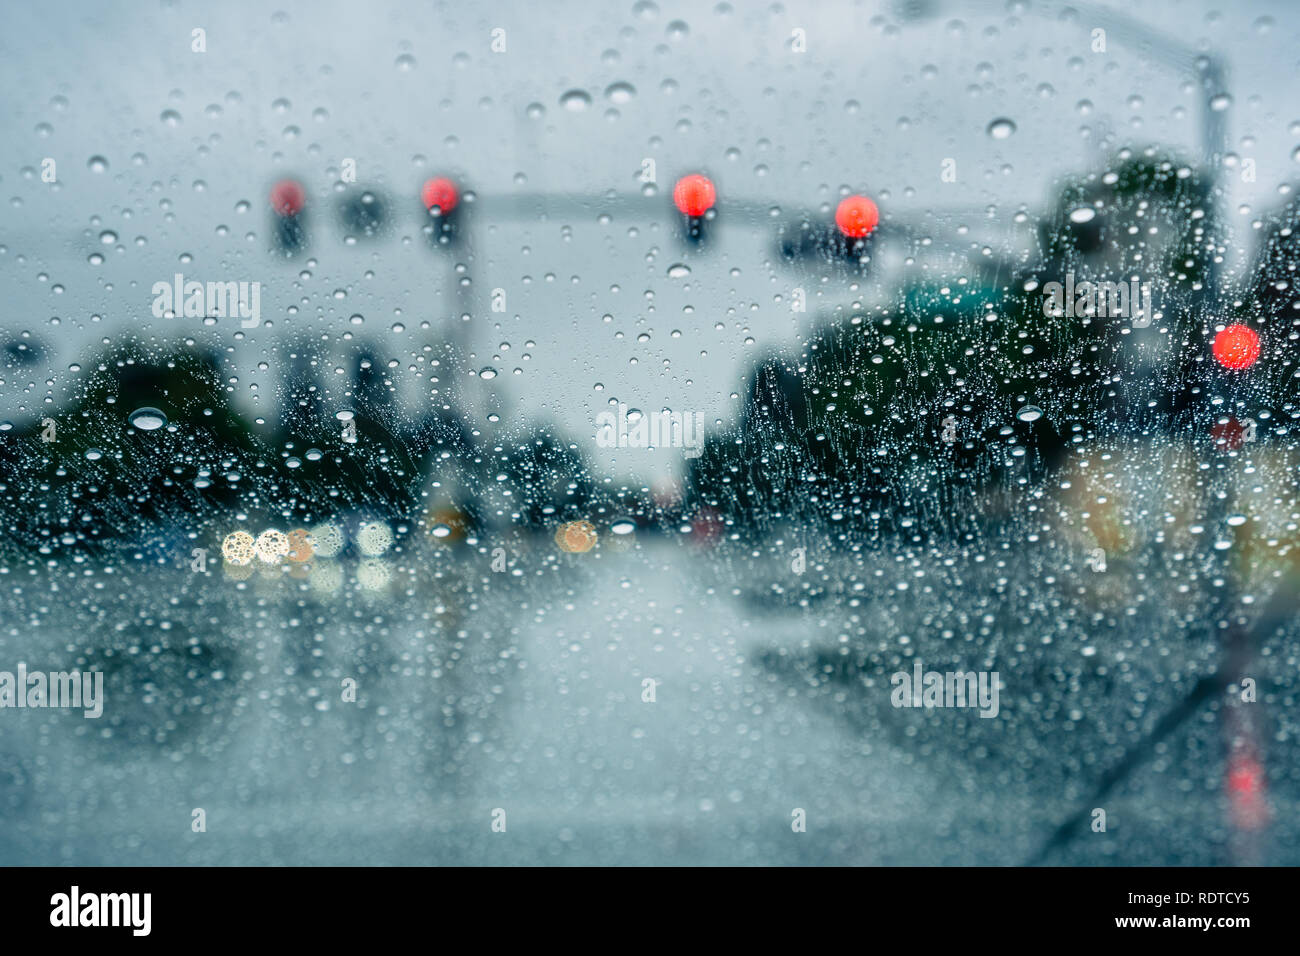 Waiting at a traffic junction for the green light during a rainy day; raindrops on the windshield Stock Photo